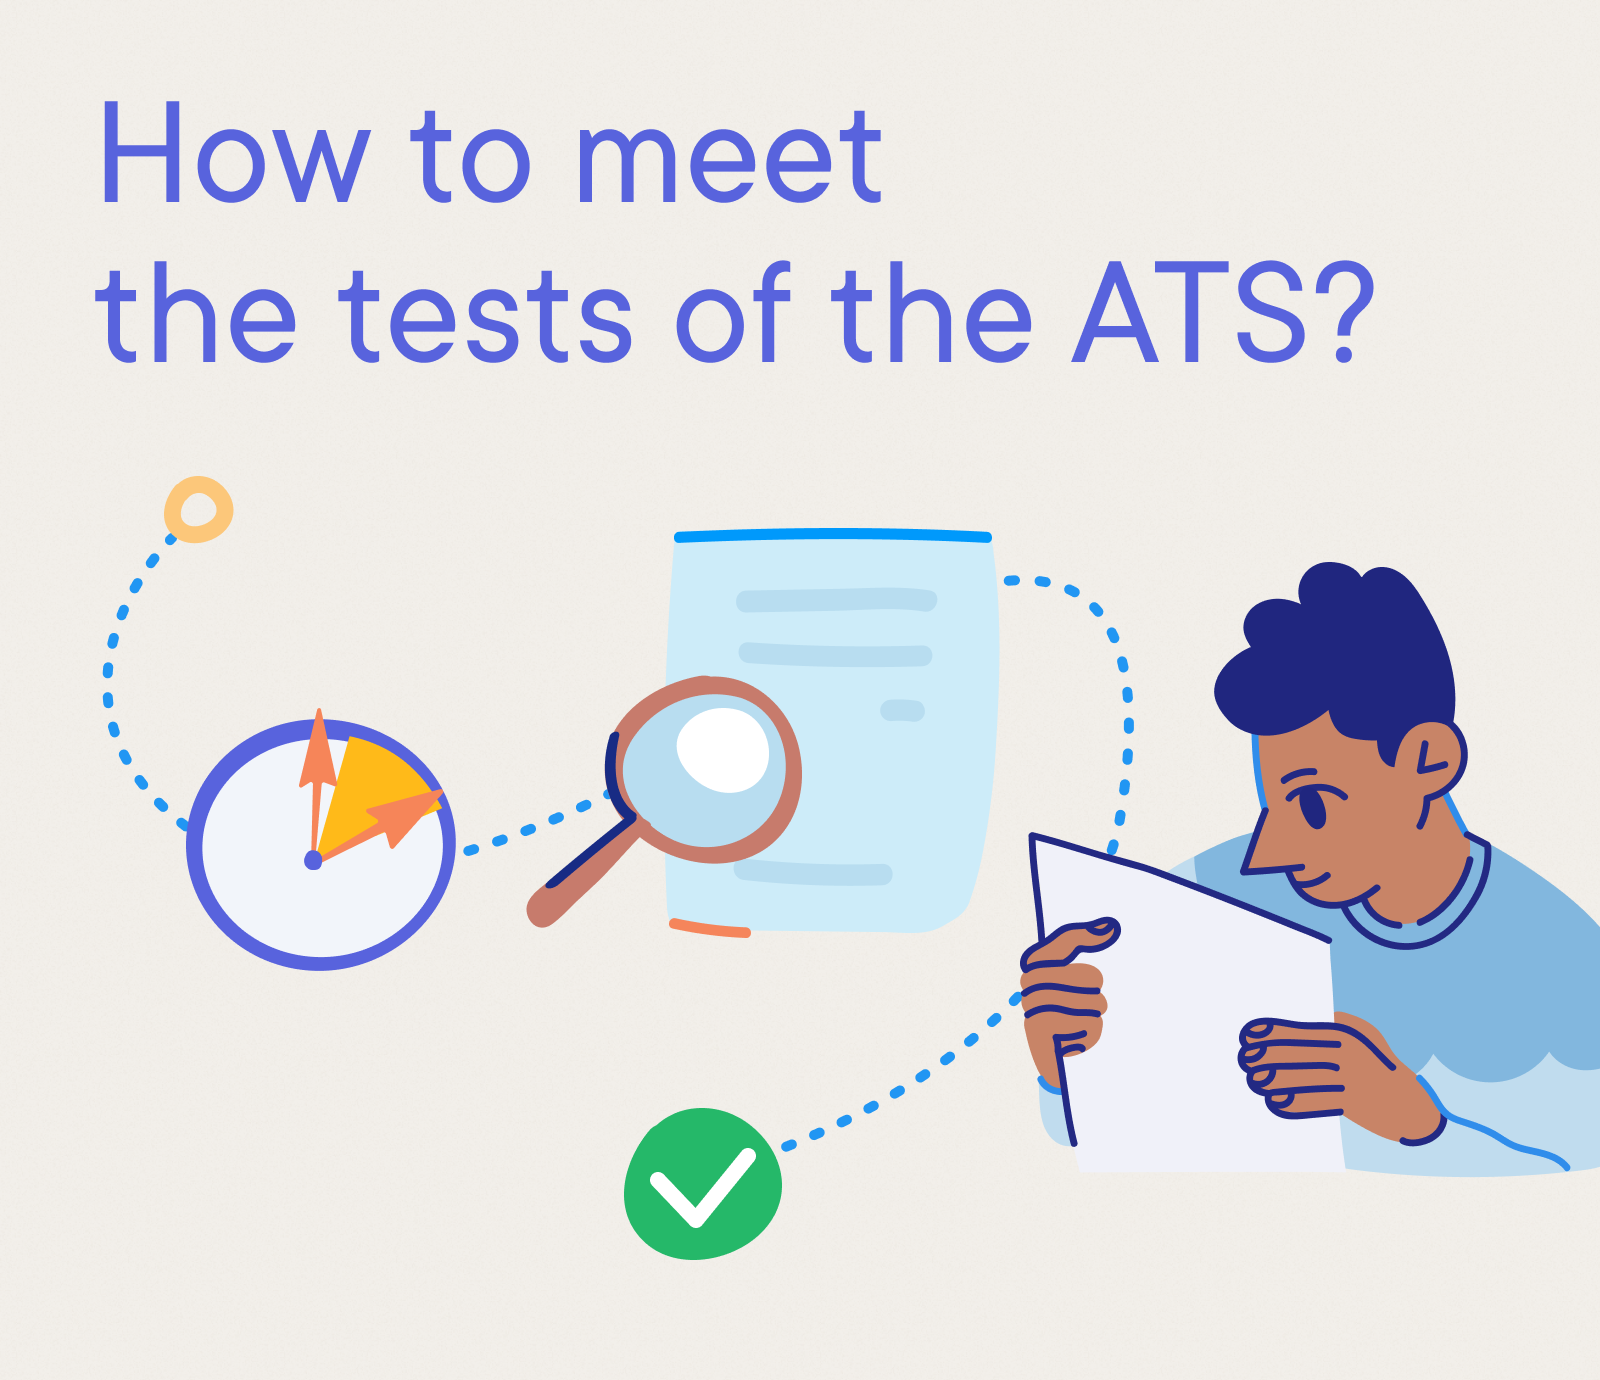 Photographer - How to meet the tests of the ATS